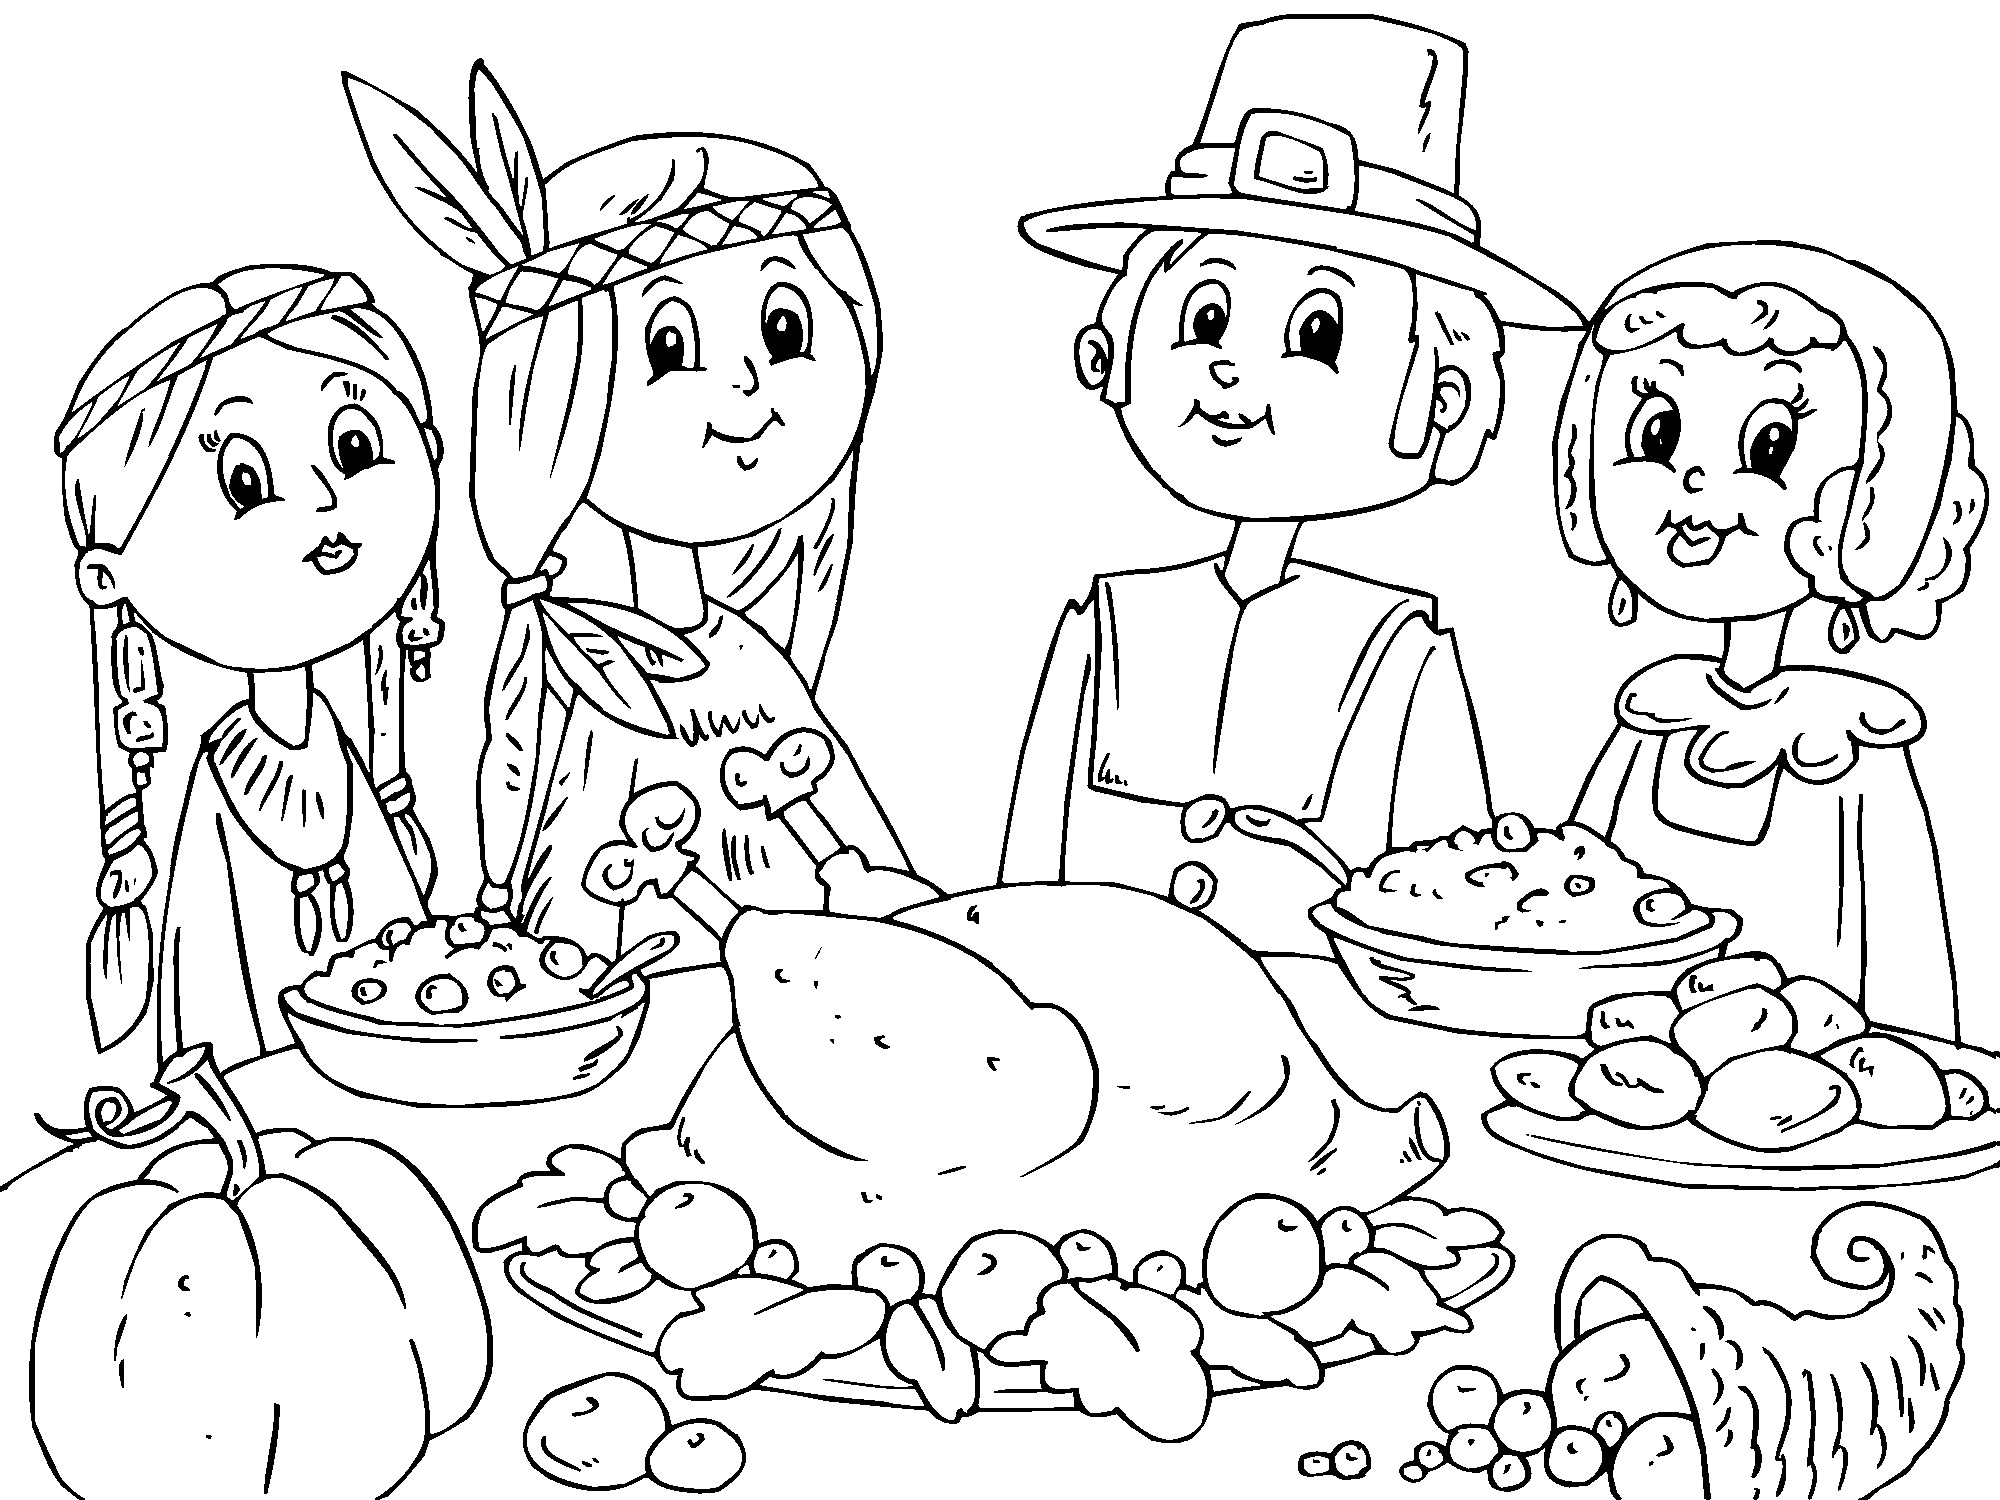 Thanksgiving Coloring Pages For Kids
 Thanksgiving day coloring pages